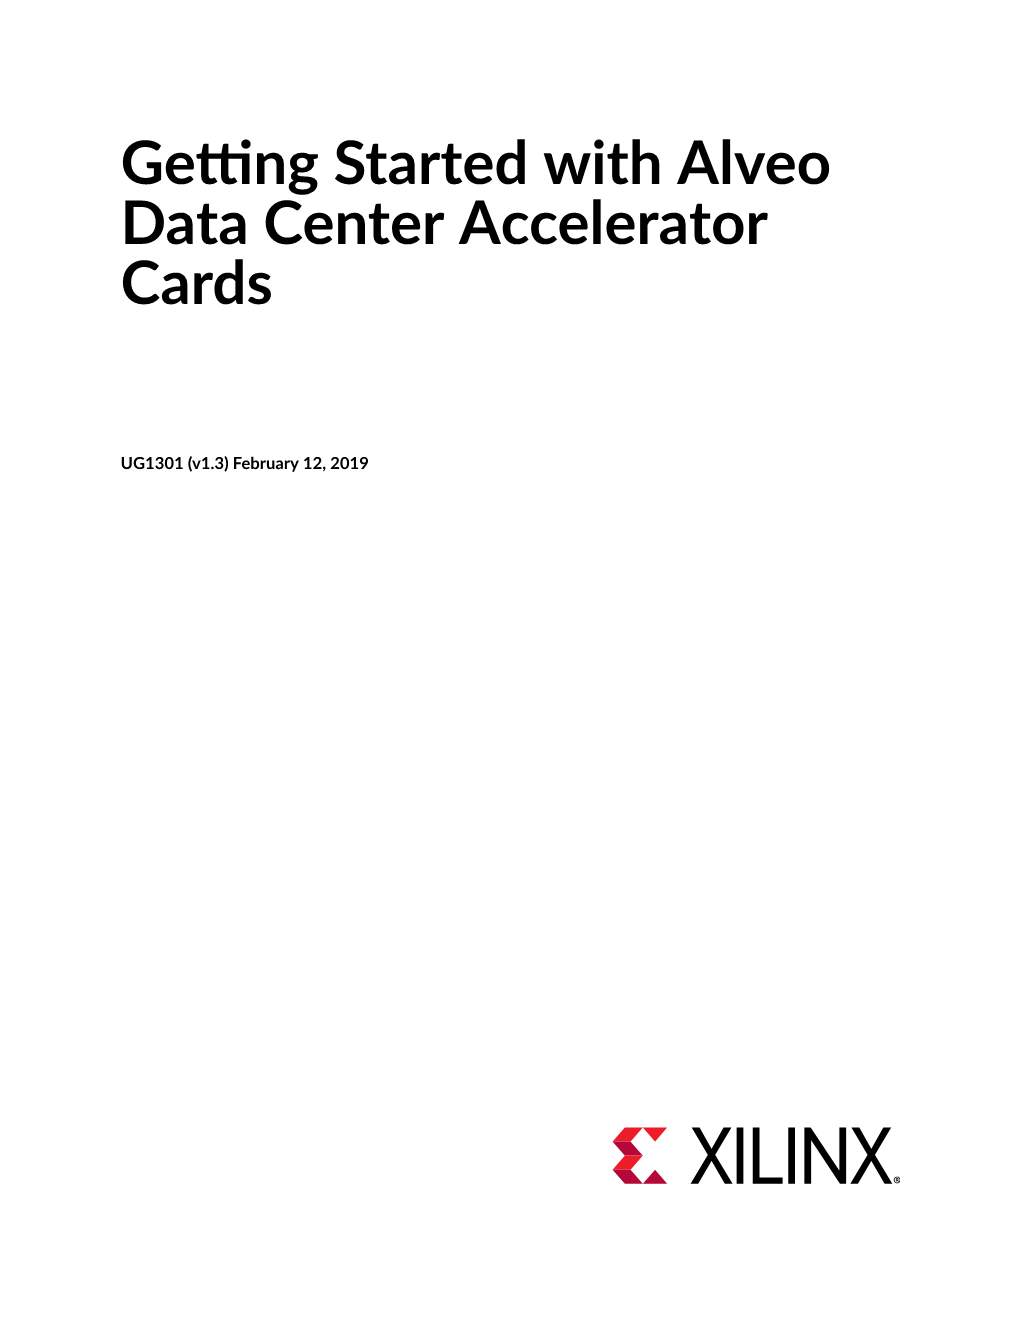 Getting Started with Alveo Data Center Accelerator Cards